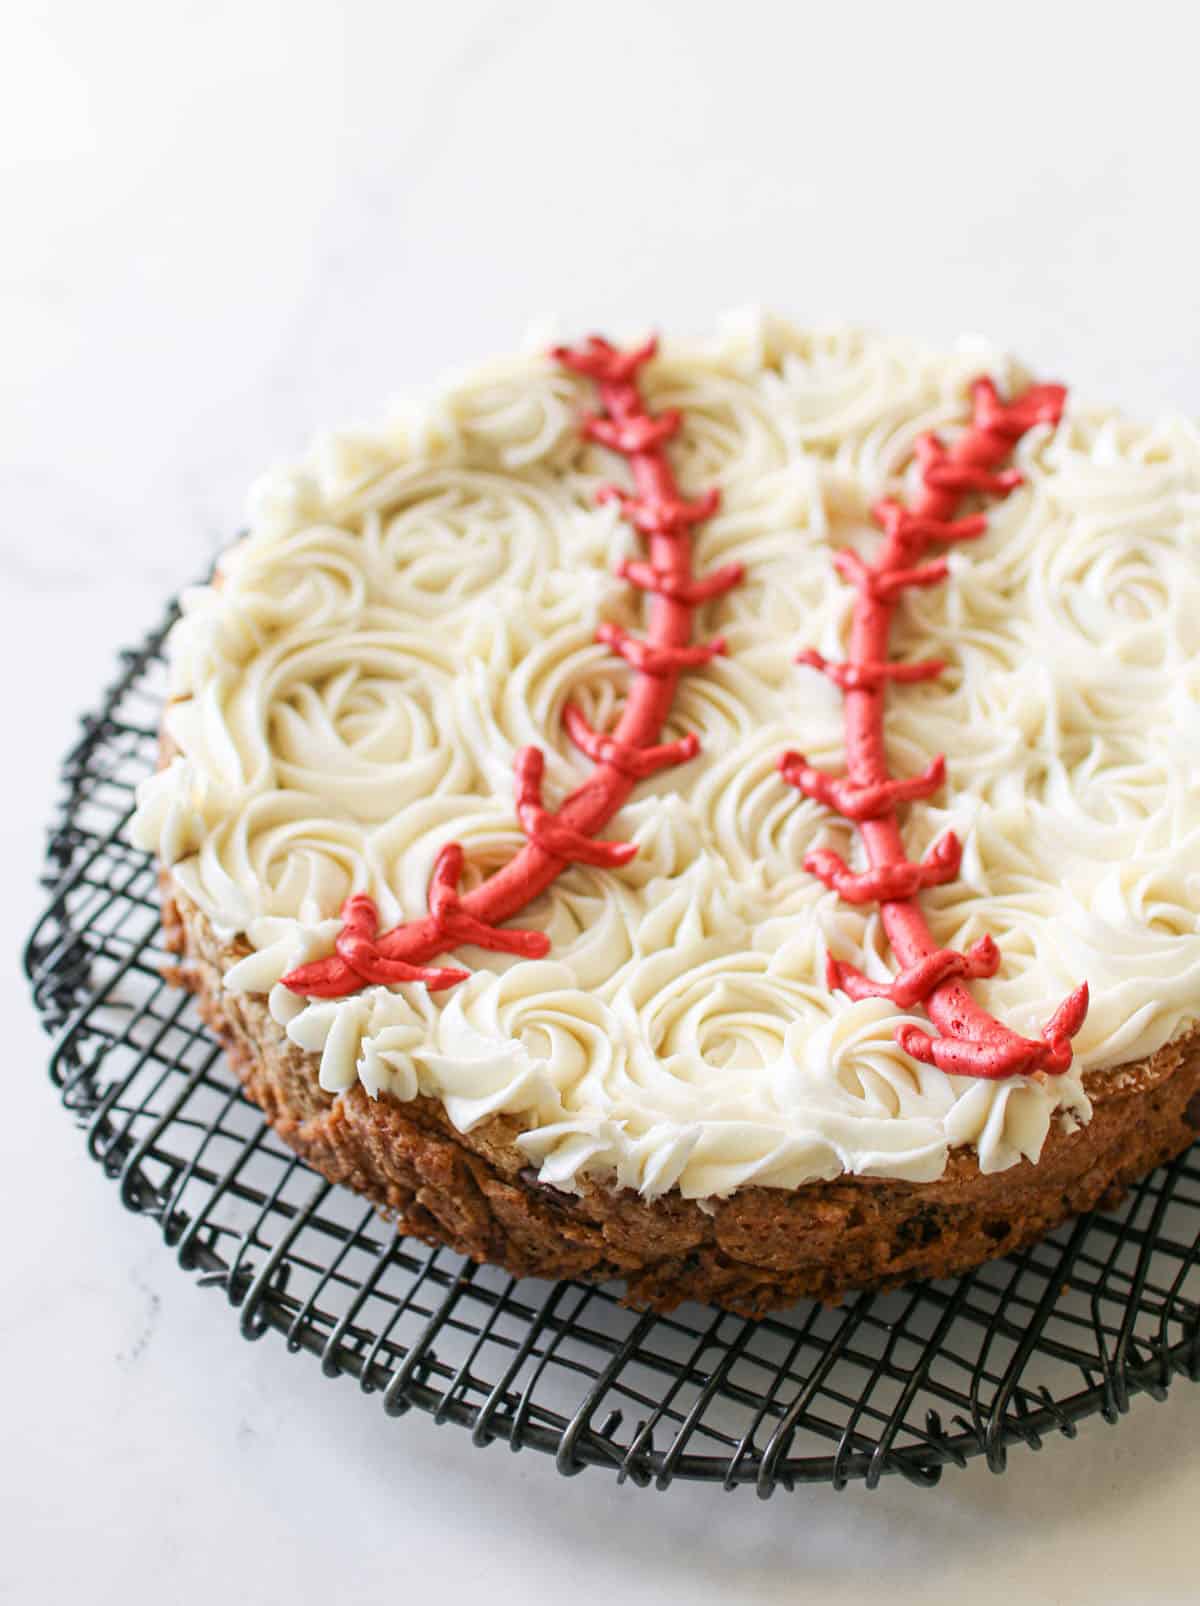 Angled view of Baseball Cookie Cake slightly cut off. The cookie cake sits on a black wire trivet on a white marble background.